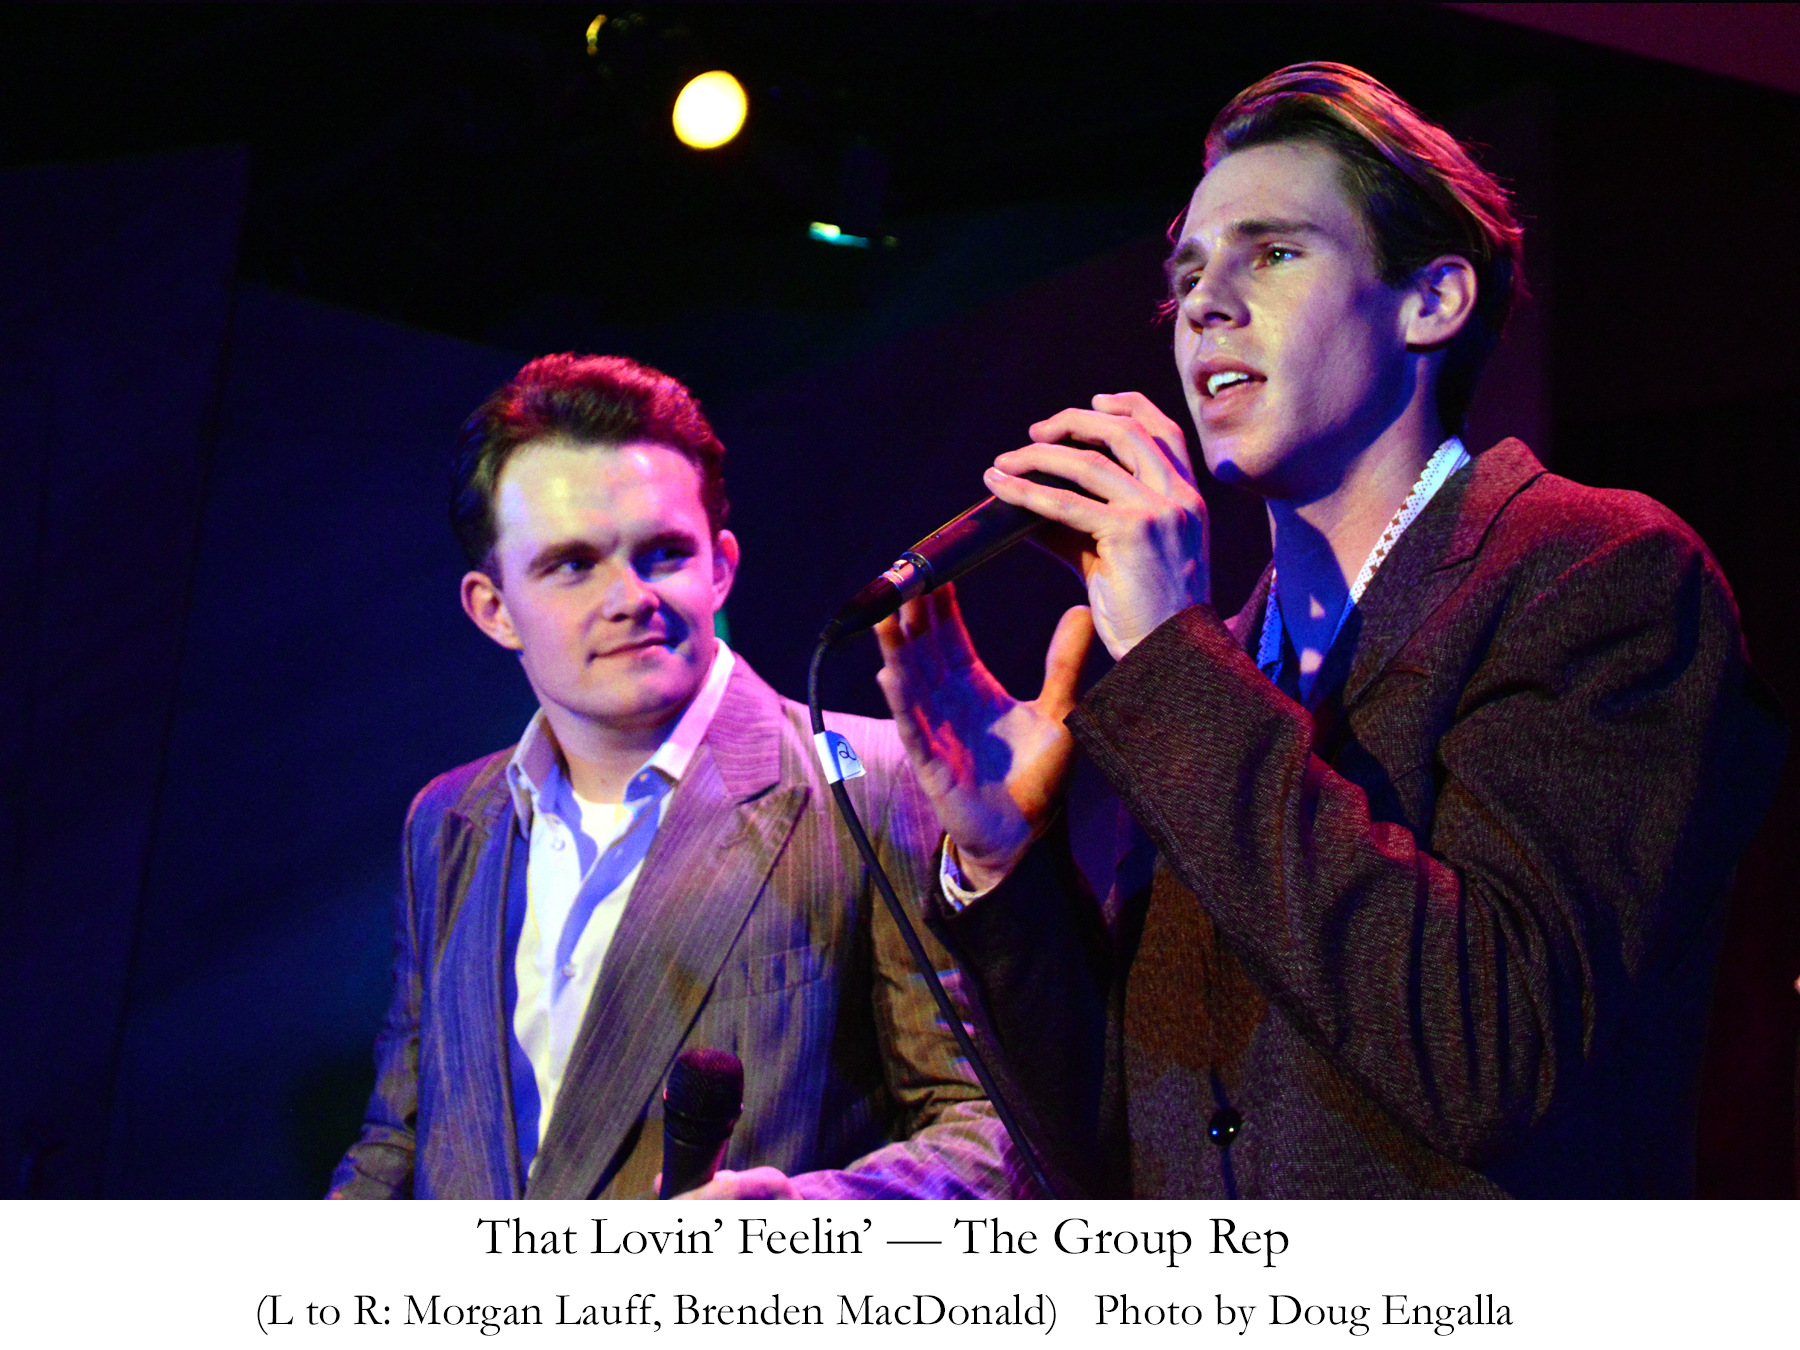 CLU Grad Now Playing Bobby Hatfield in New Righteous Brothers Musical